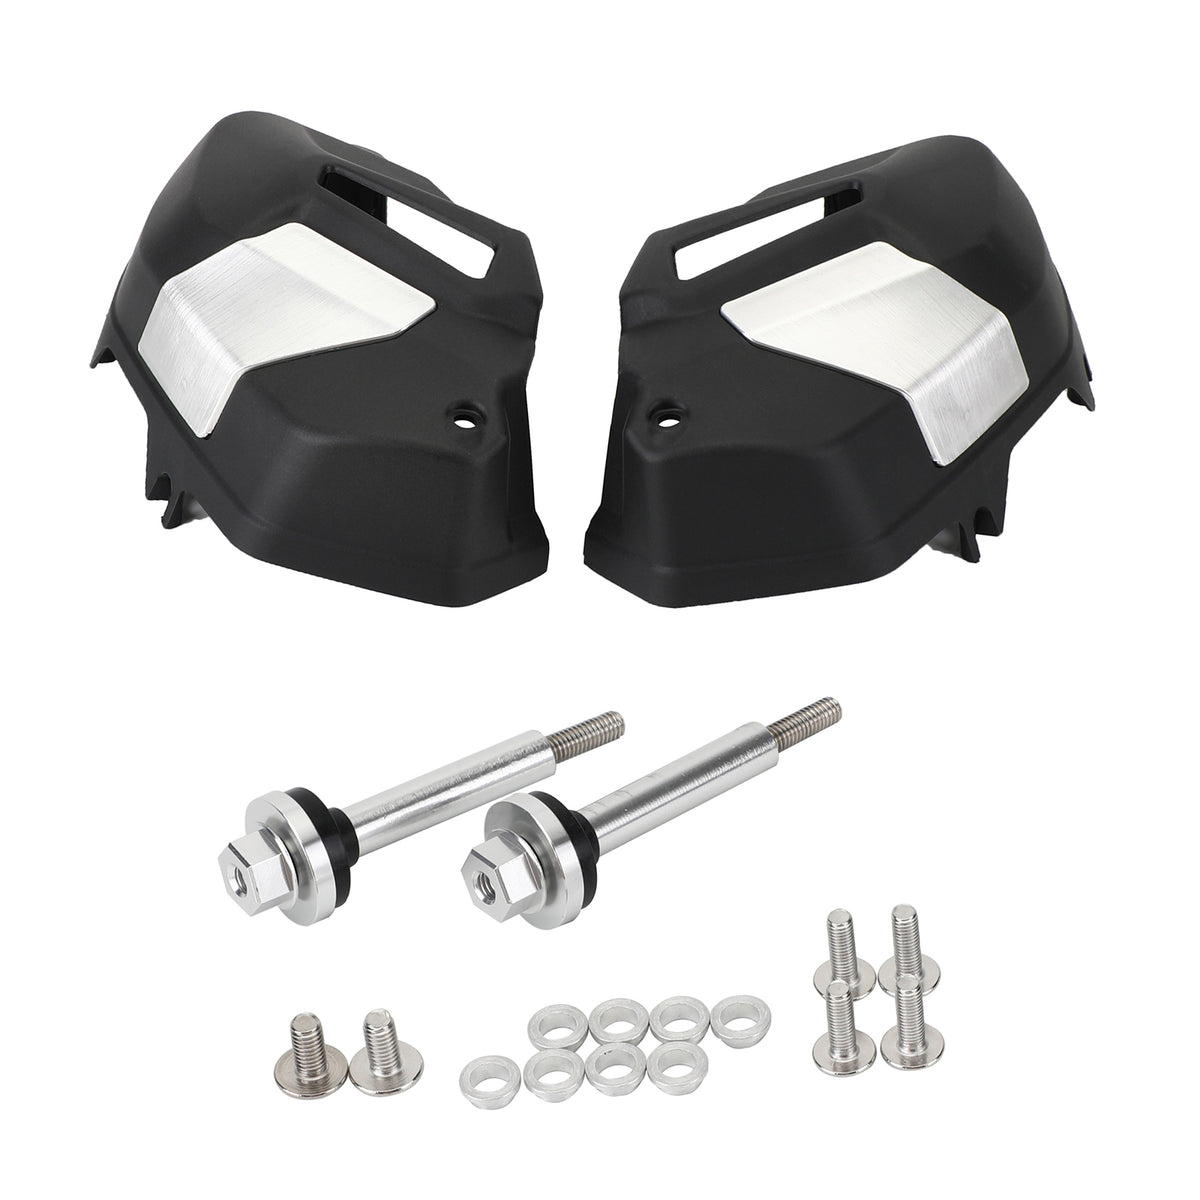 Cylinder Head Guards Protector For BMW R 1250 GS LC ADV R1250 R,Rt,Rs 2019 2020